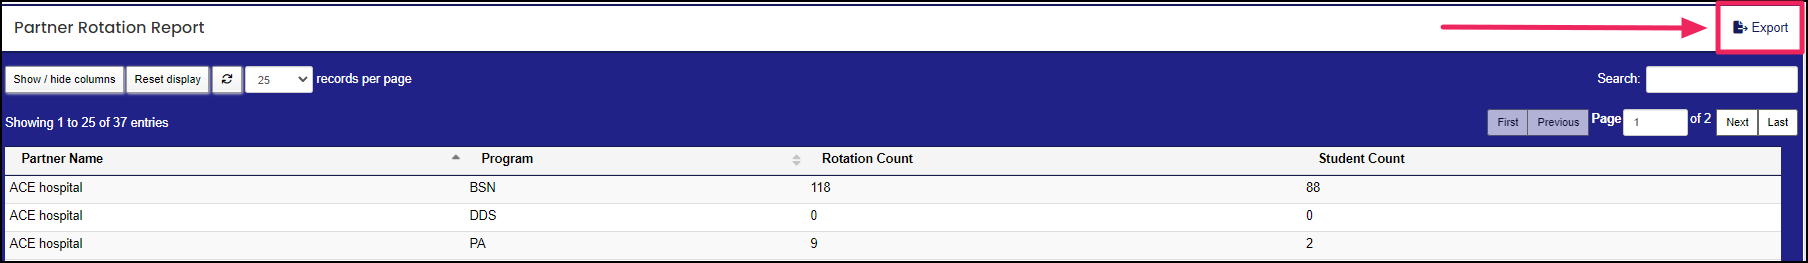 partner rotation report table highlighting export button